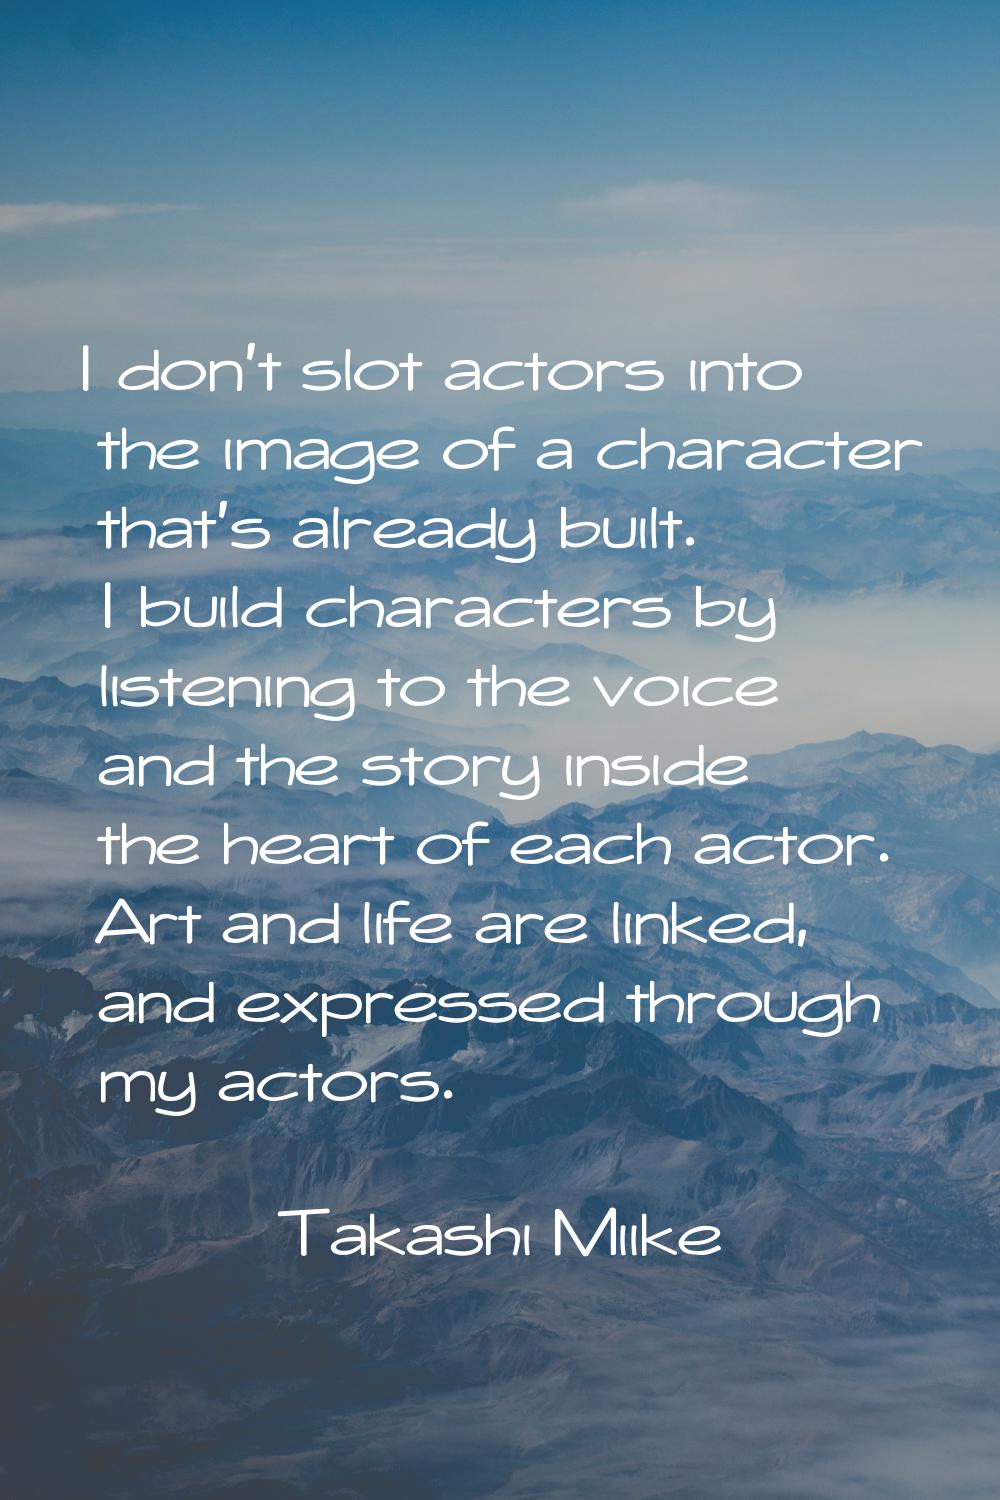 I don't slot actors into the image of a character that's already built. I build characters by liste